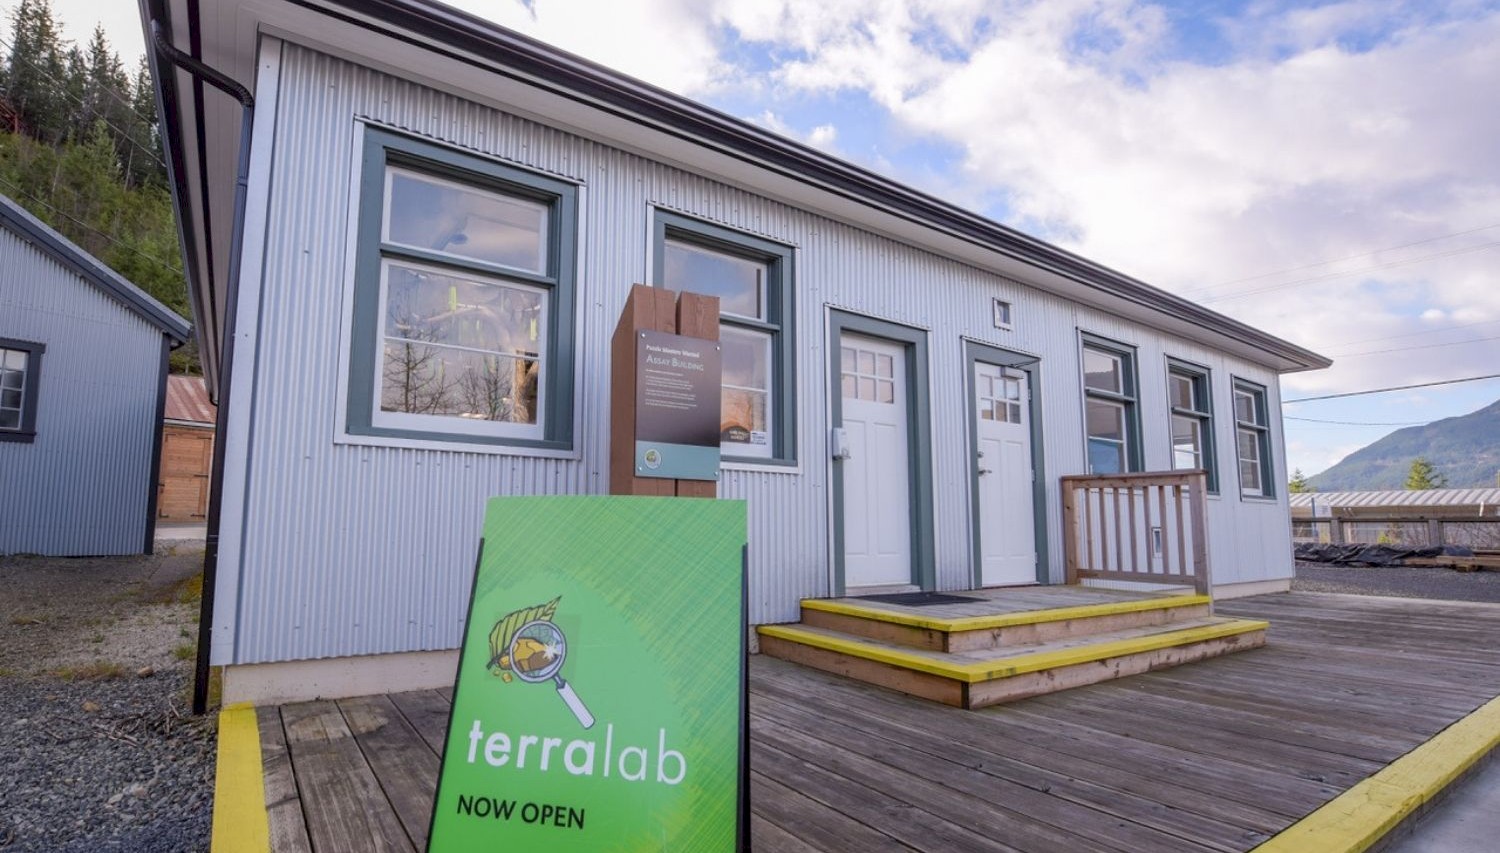 4 Reasons to Explore the New TerraLab at The Britannia Mine Museum